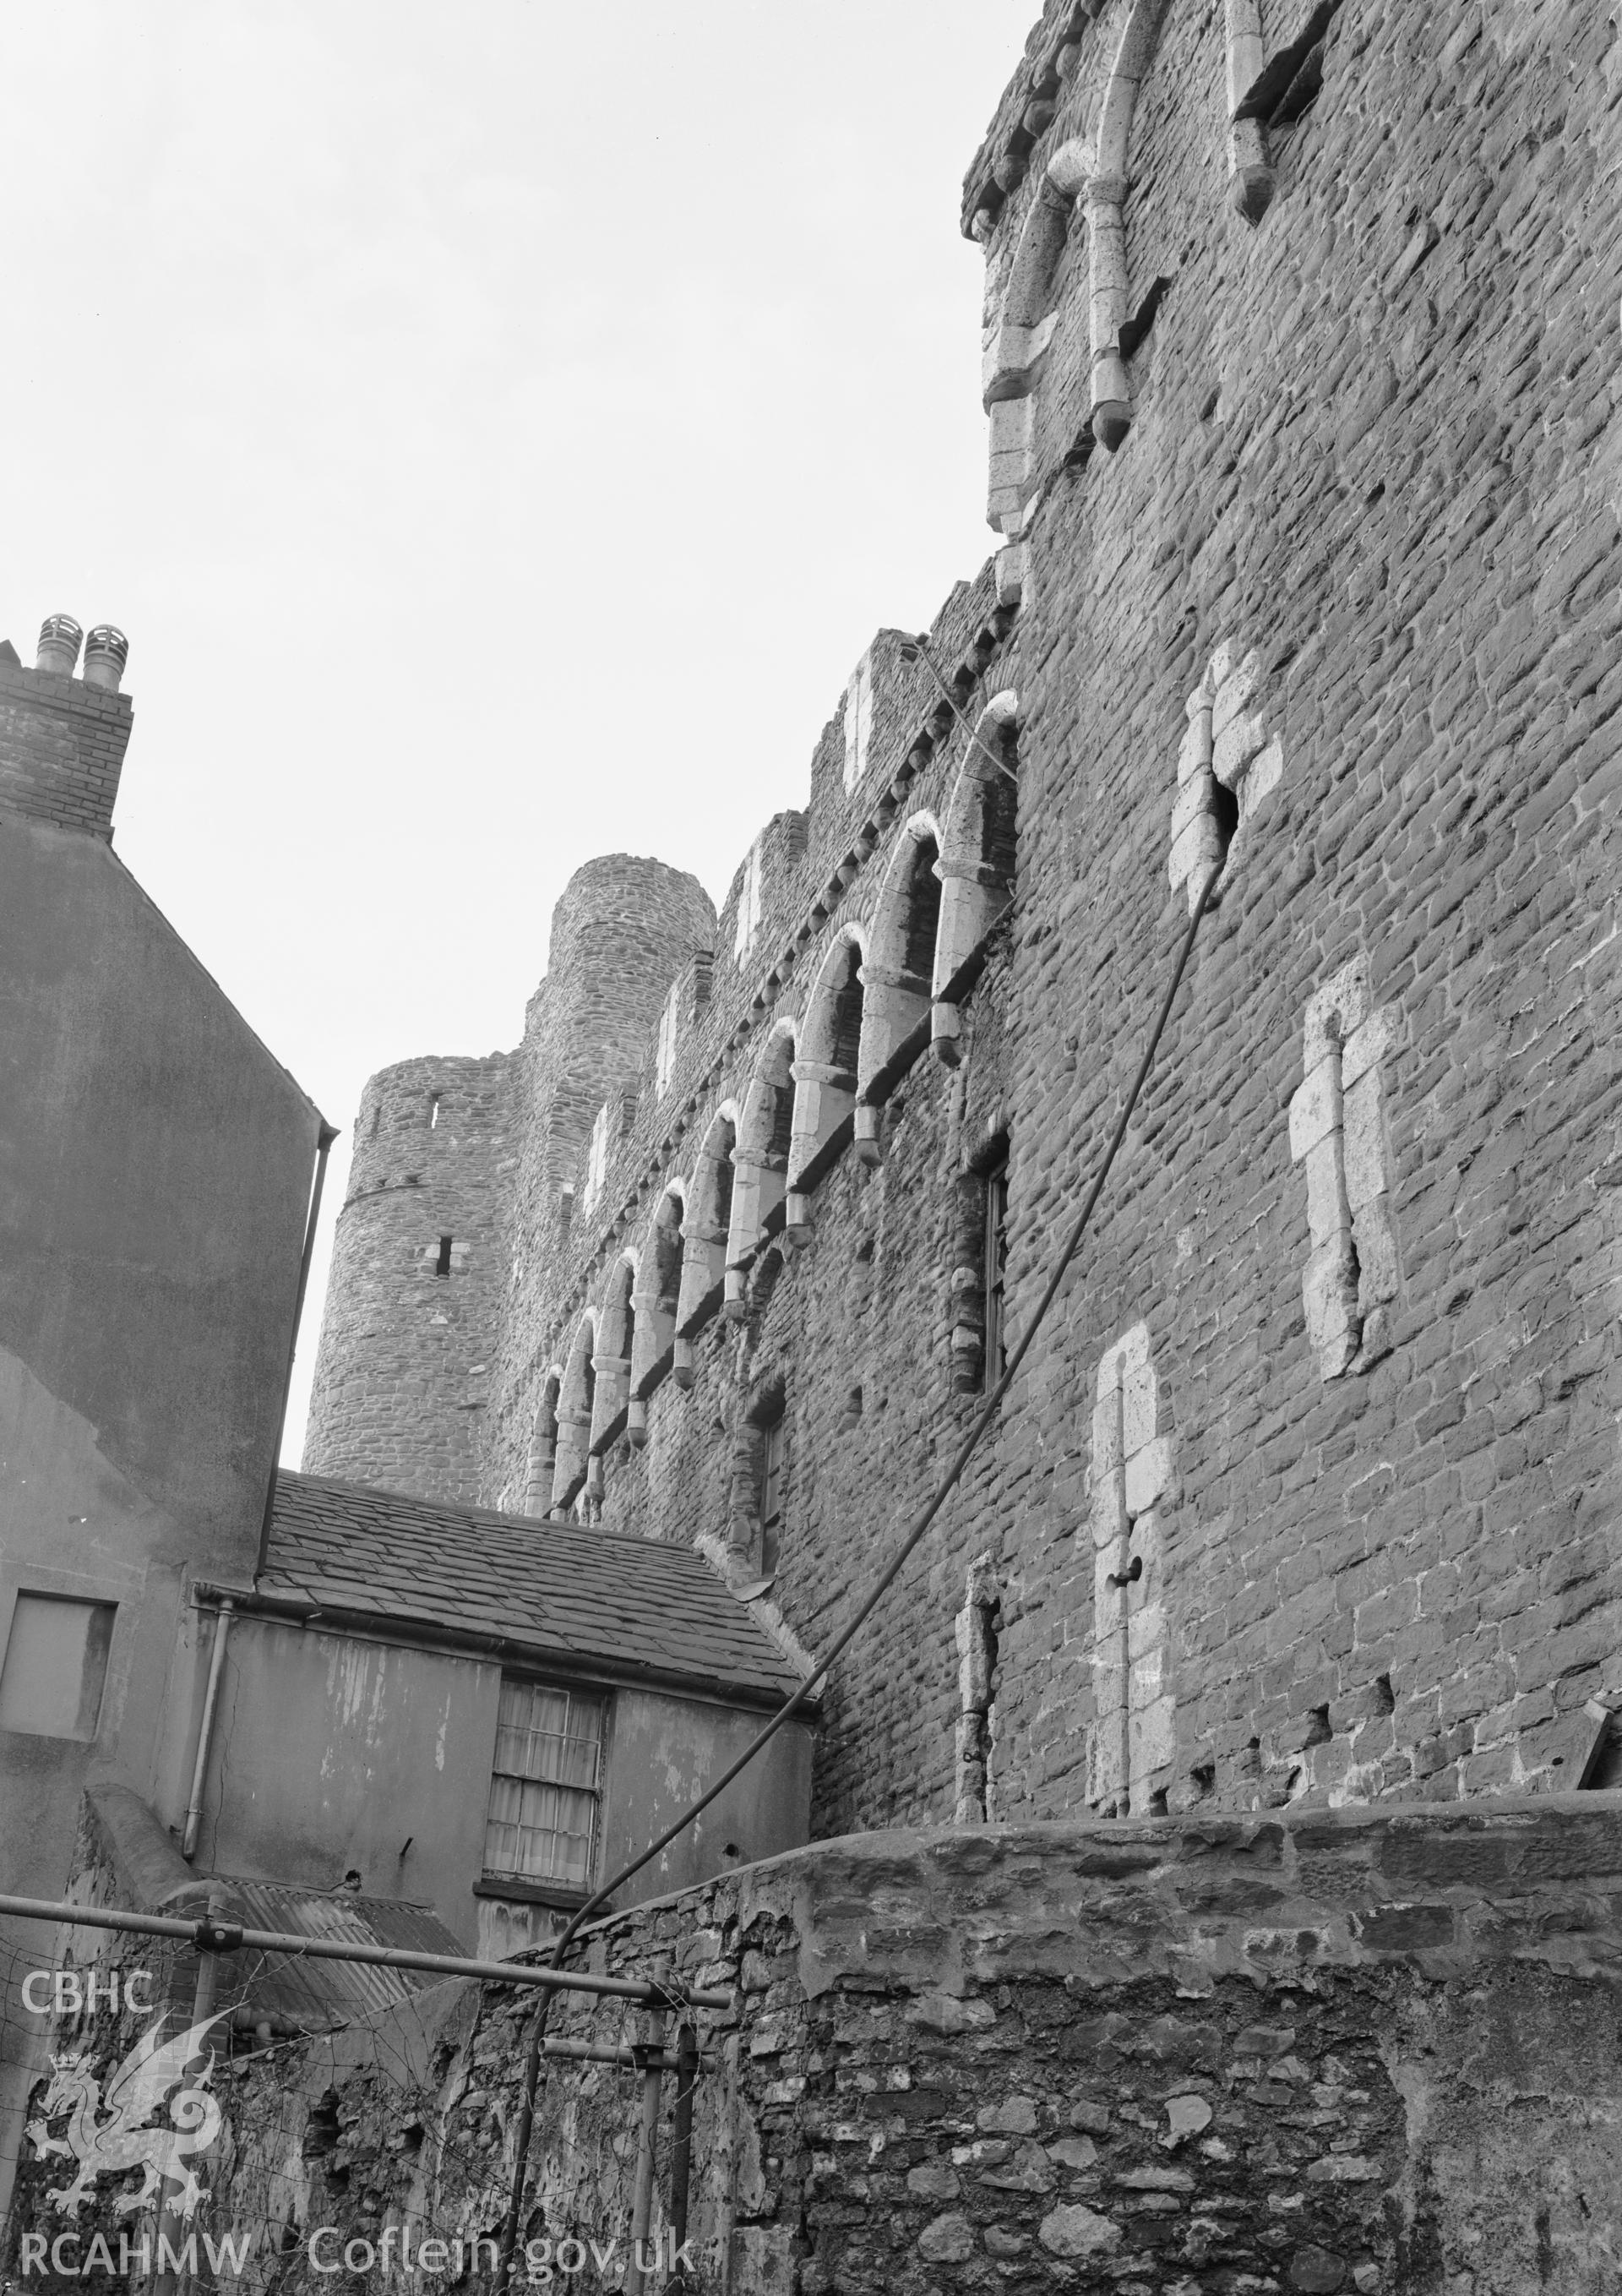 D.O.E photograph of Swansea Castle - east facade before removal of hotel.